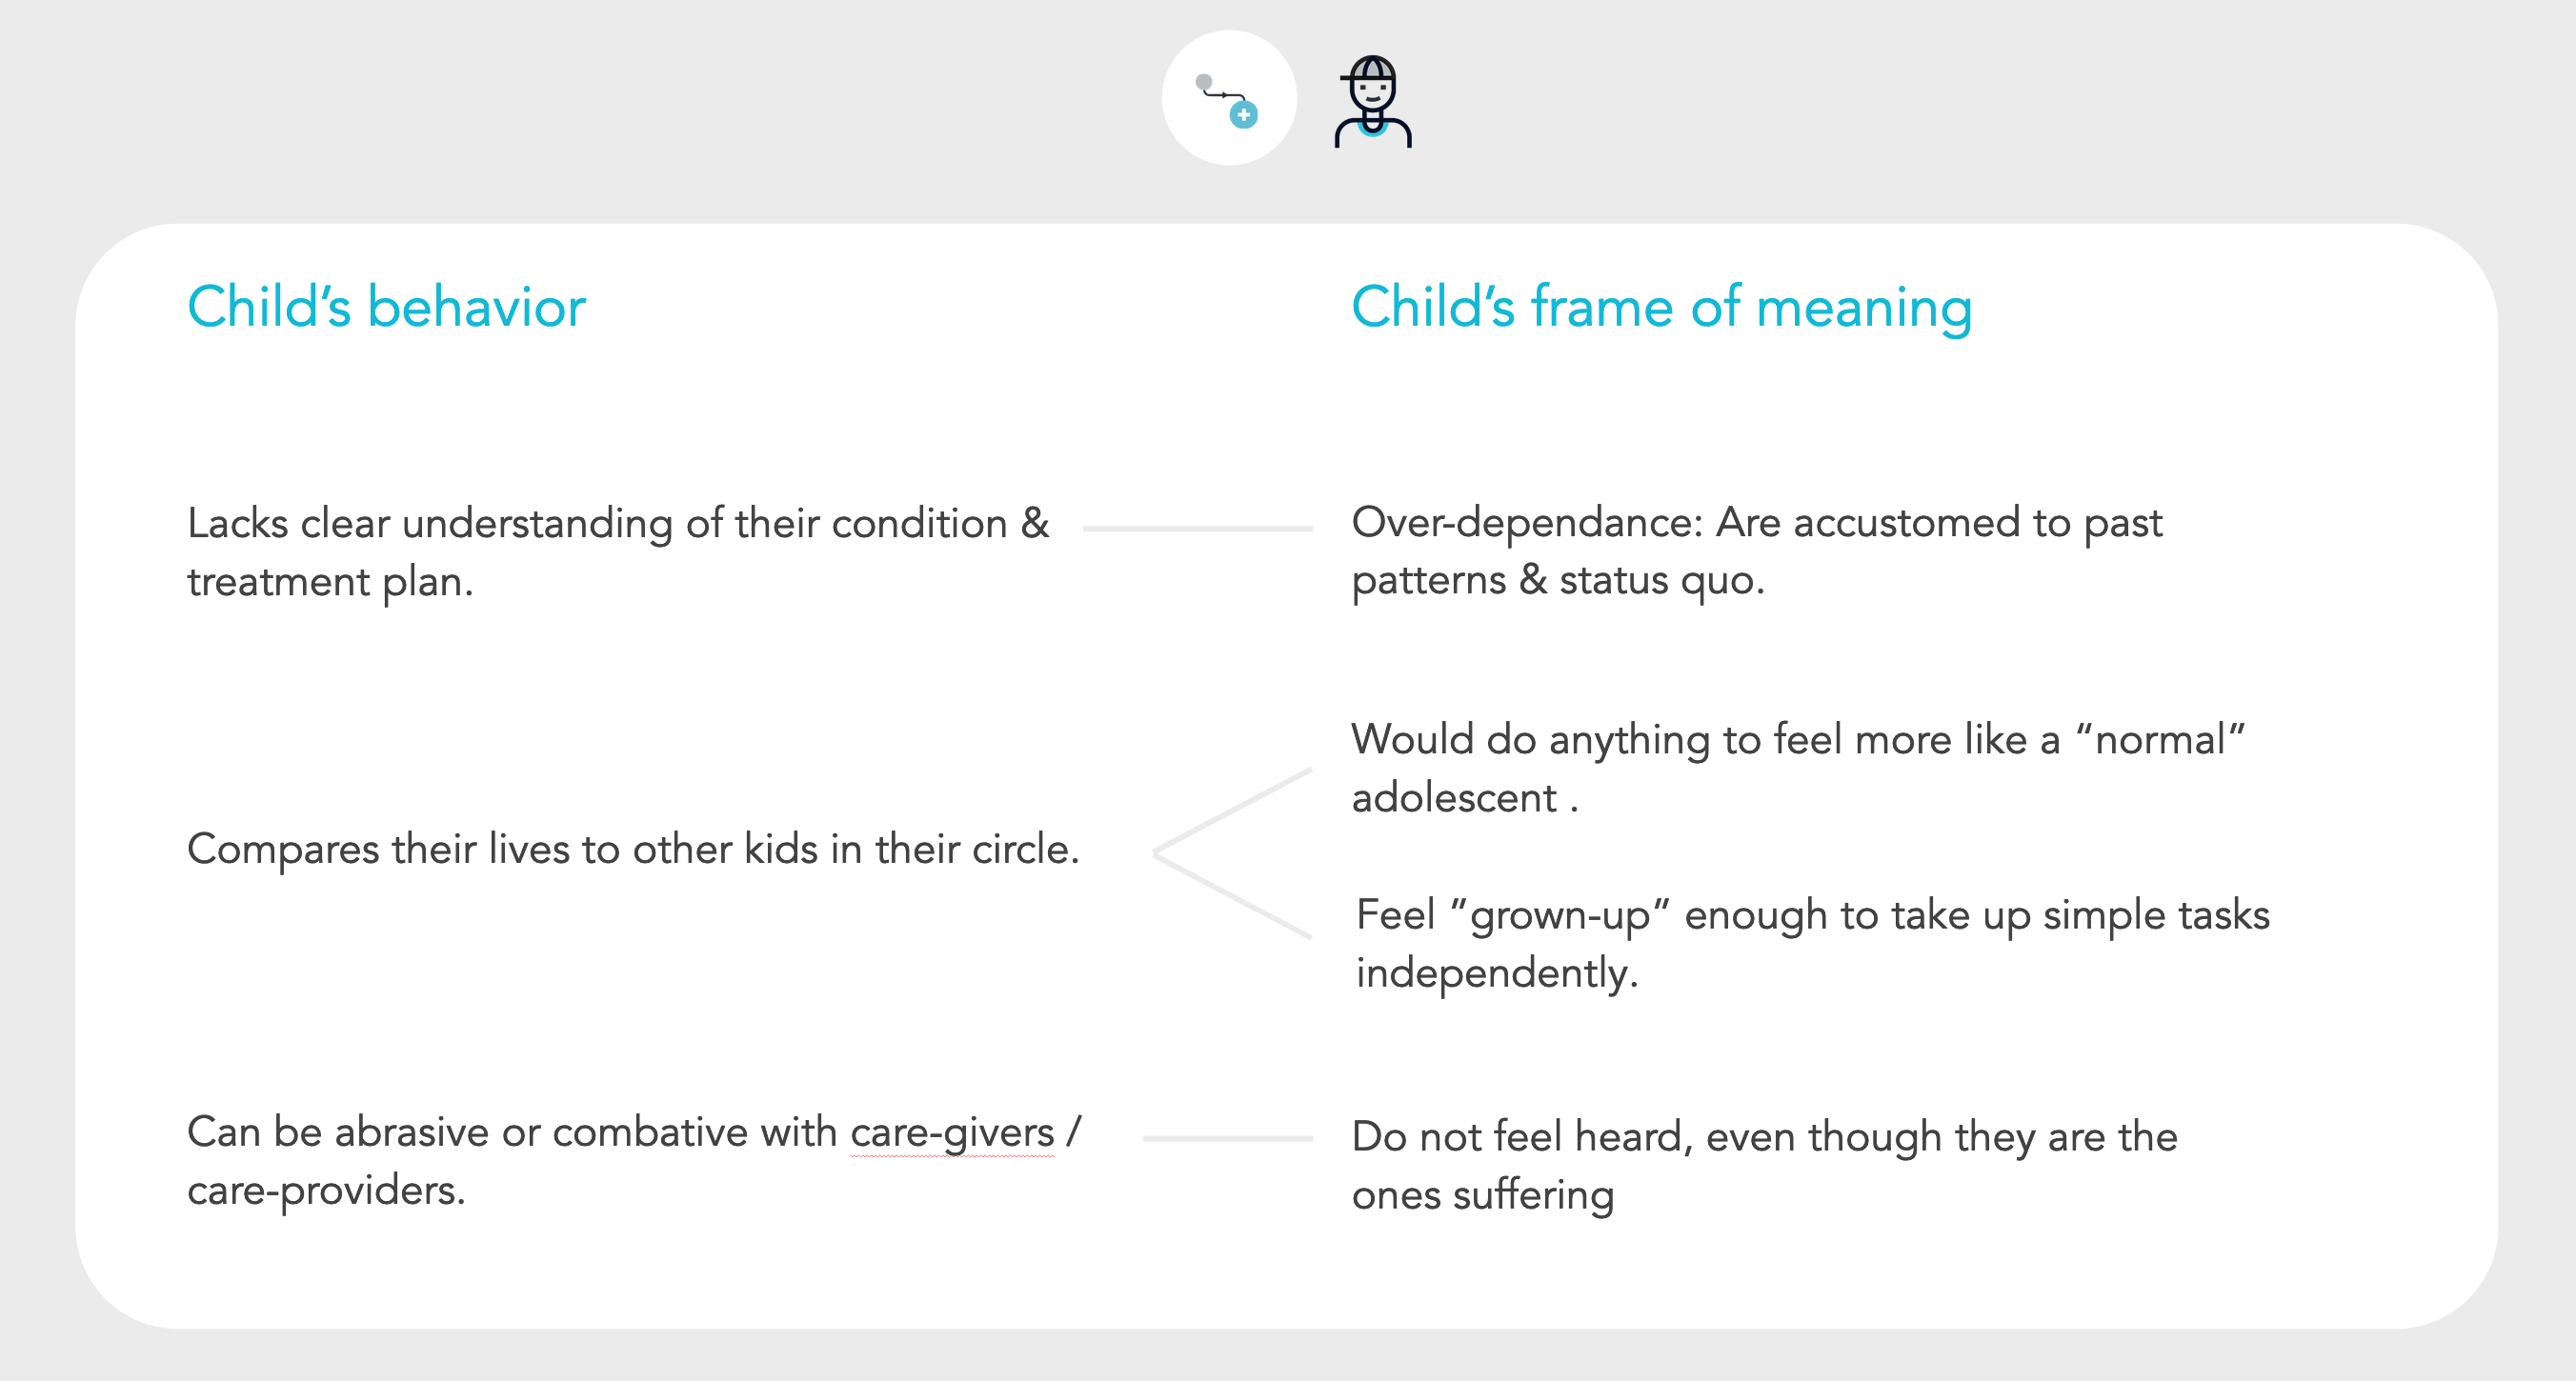 A Patient's Frame of Meaning